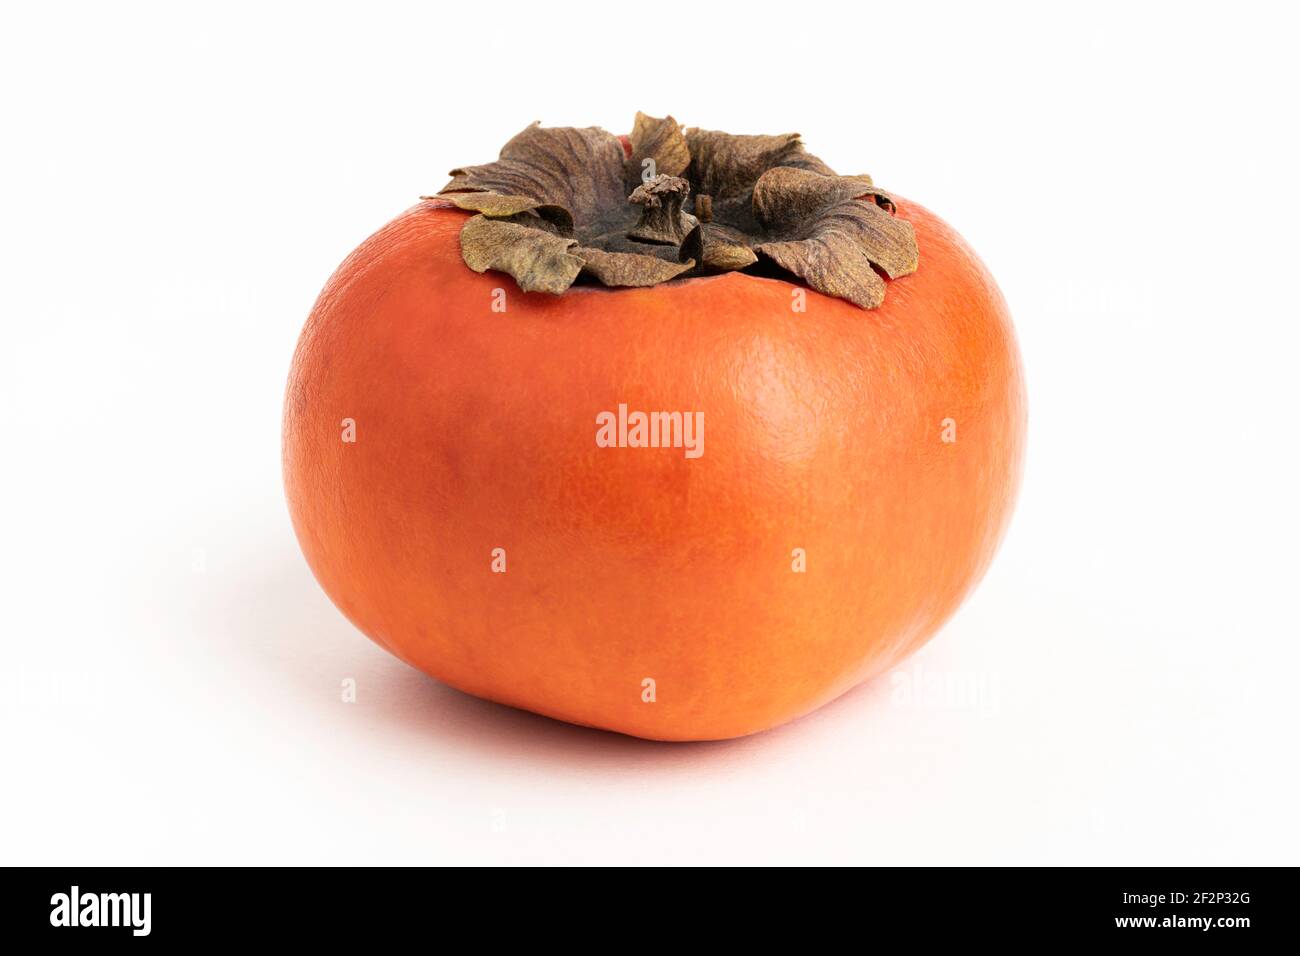 Close-up shot with shallow depth of field of a ripe persimmon fruit set on a plain white background. Stock Photo